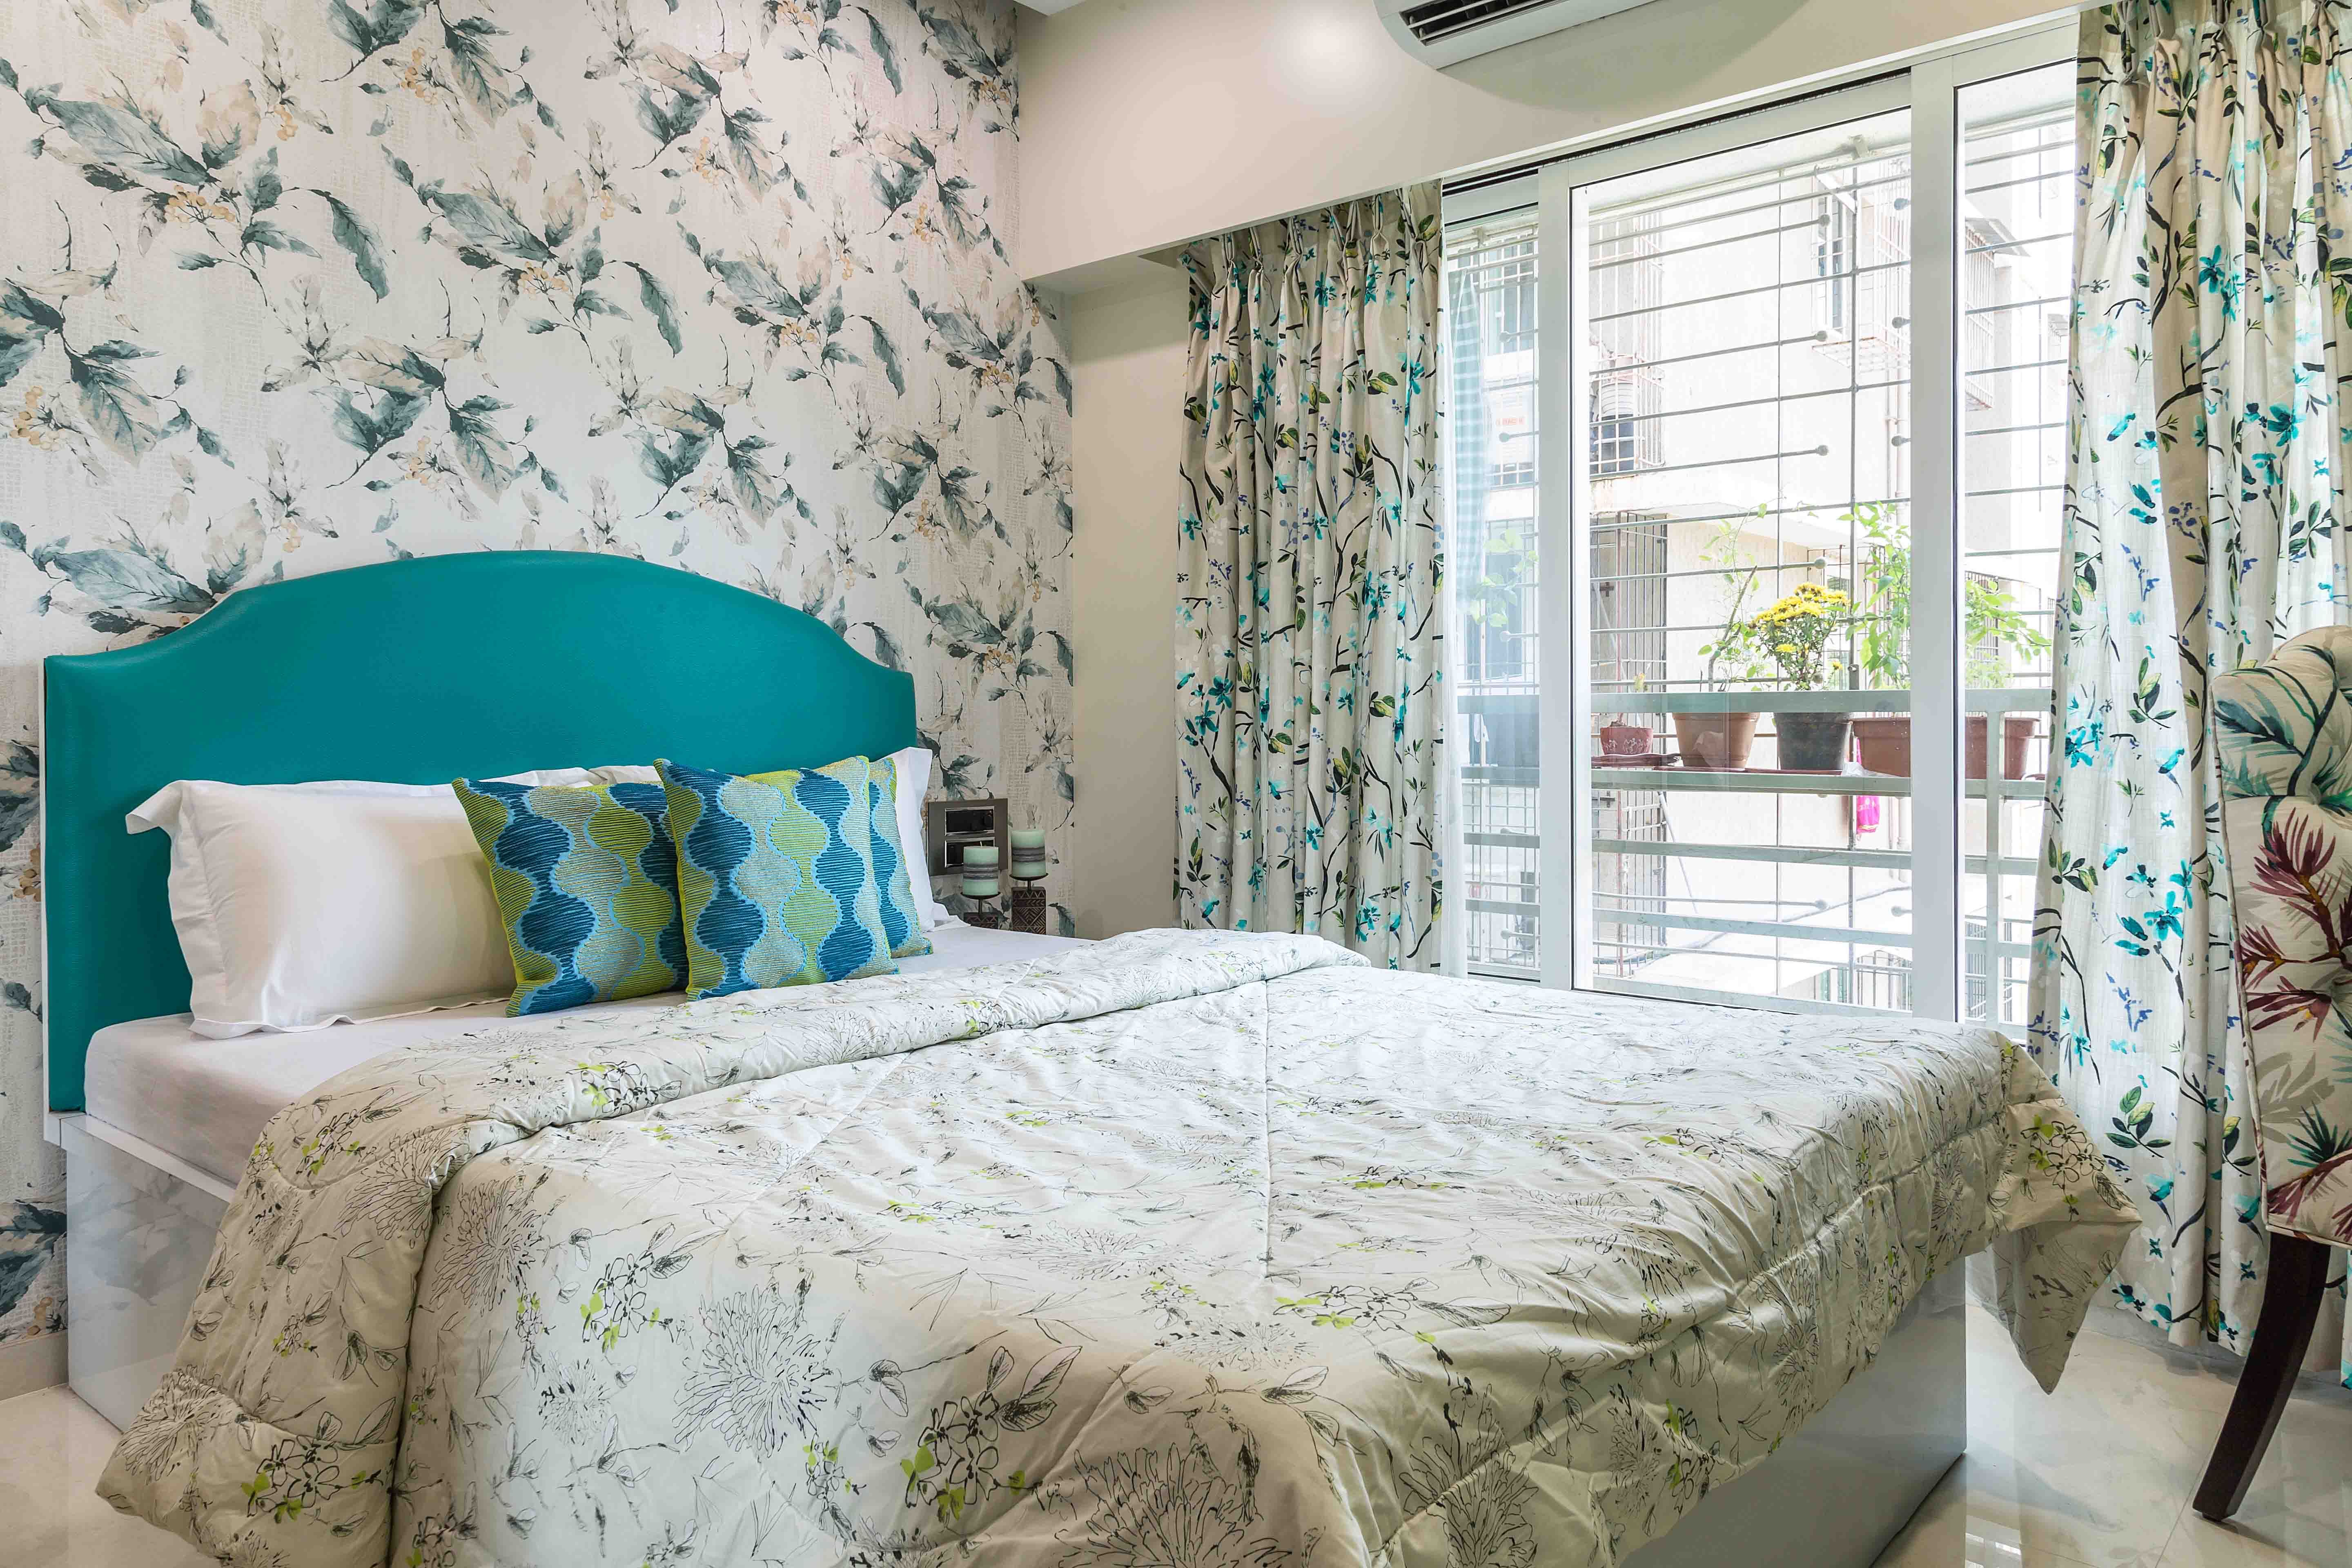 Contemporary Guest Room Design In Blue And White With Leafy Wallpaper